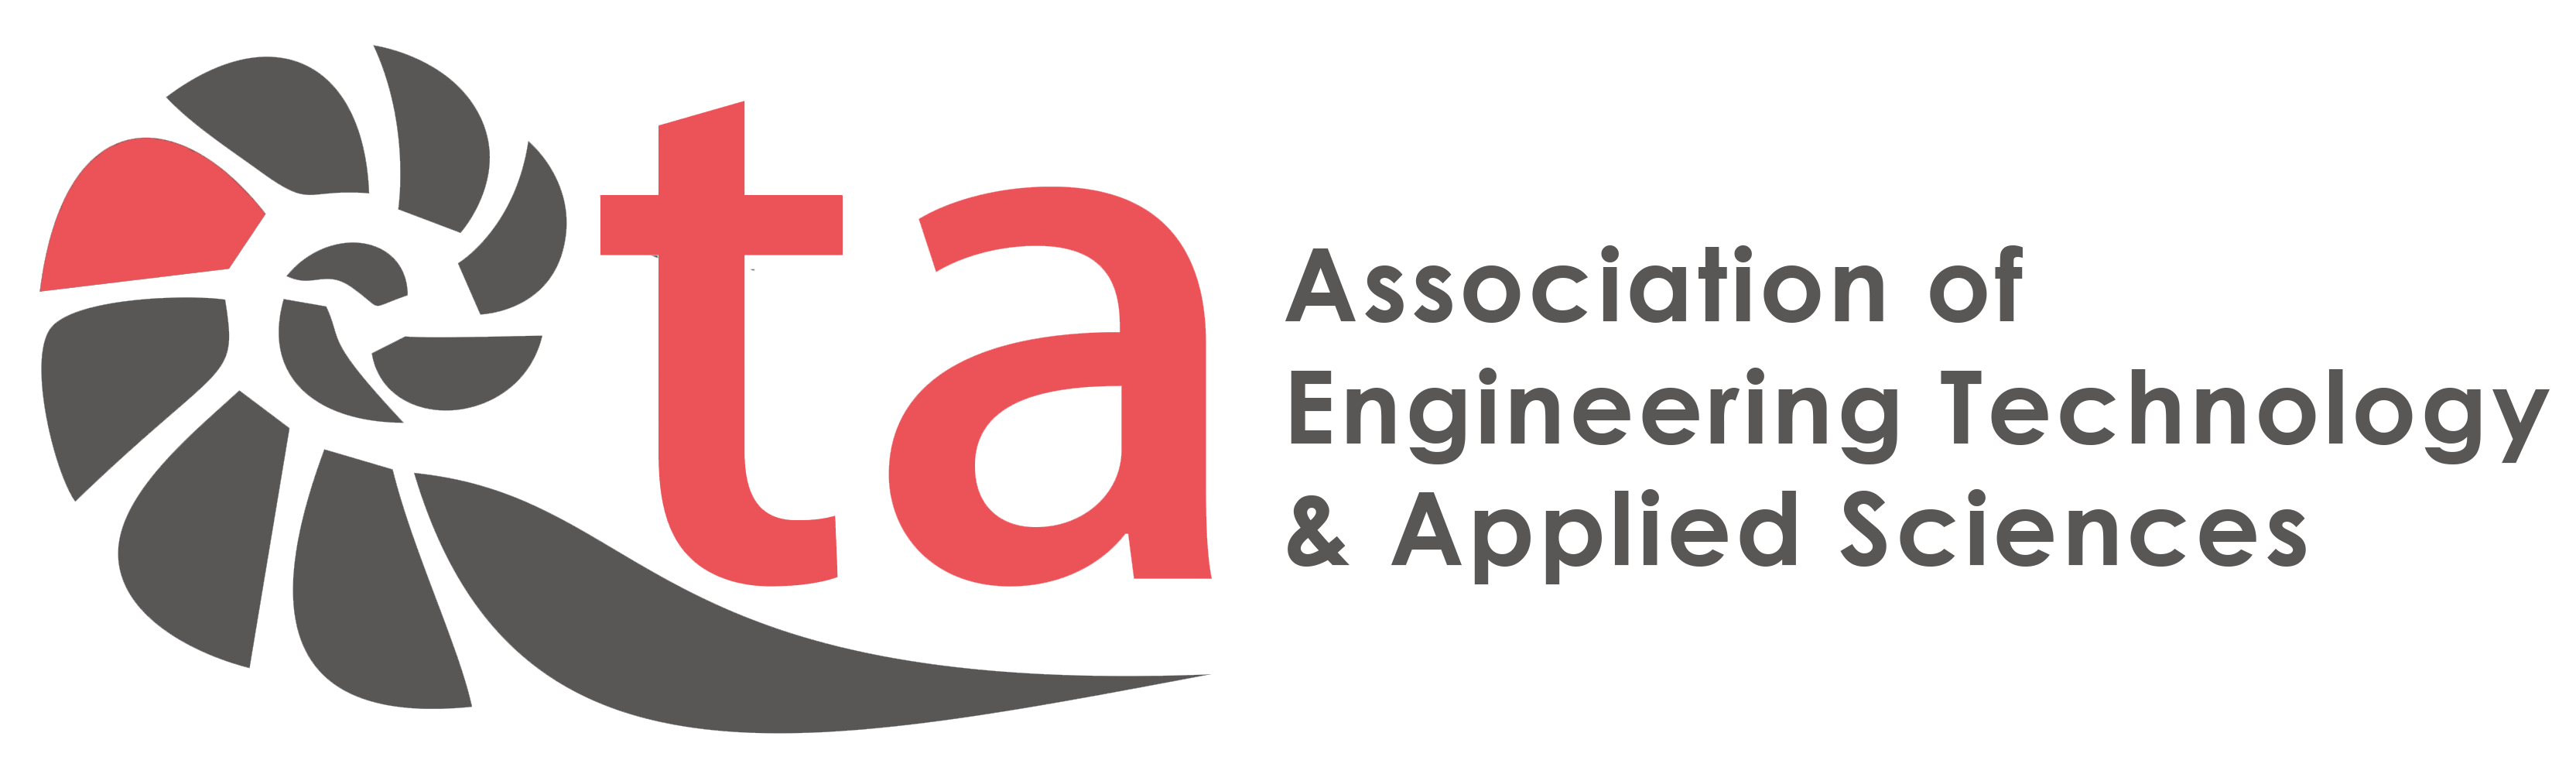 AETA 1st International Conference on Applied Sciences, System Engineering, Information Technology & Networking  (ASIN)